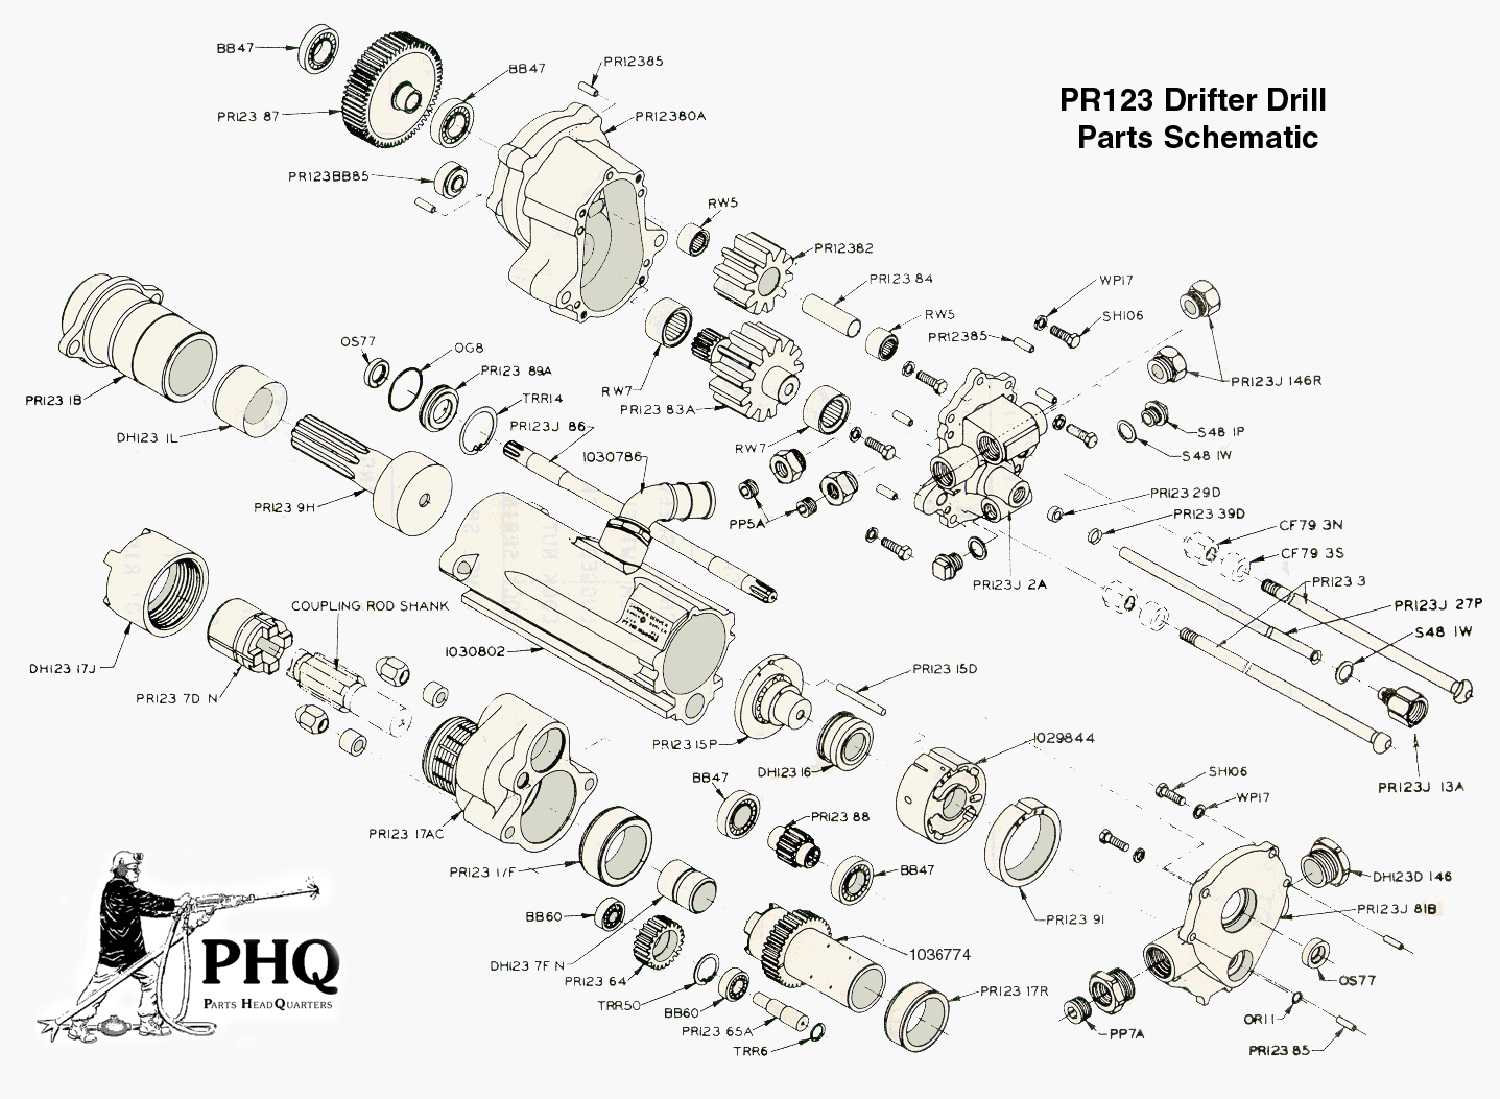 Details about   Gardner Denver PR123 PR55 Drifter Drill Air Connection Tube with O-Ring *NEW* 